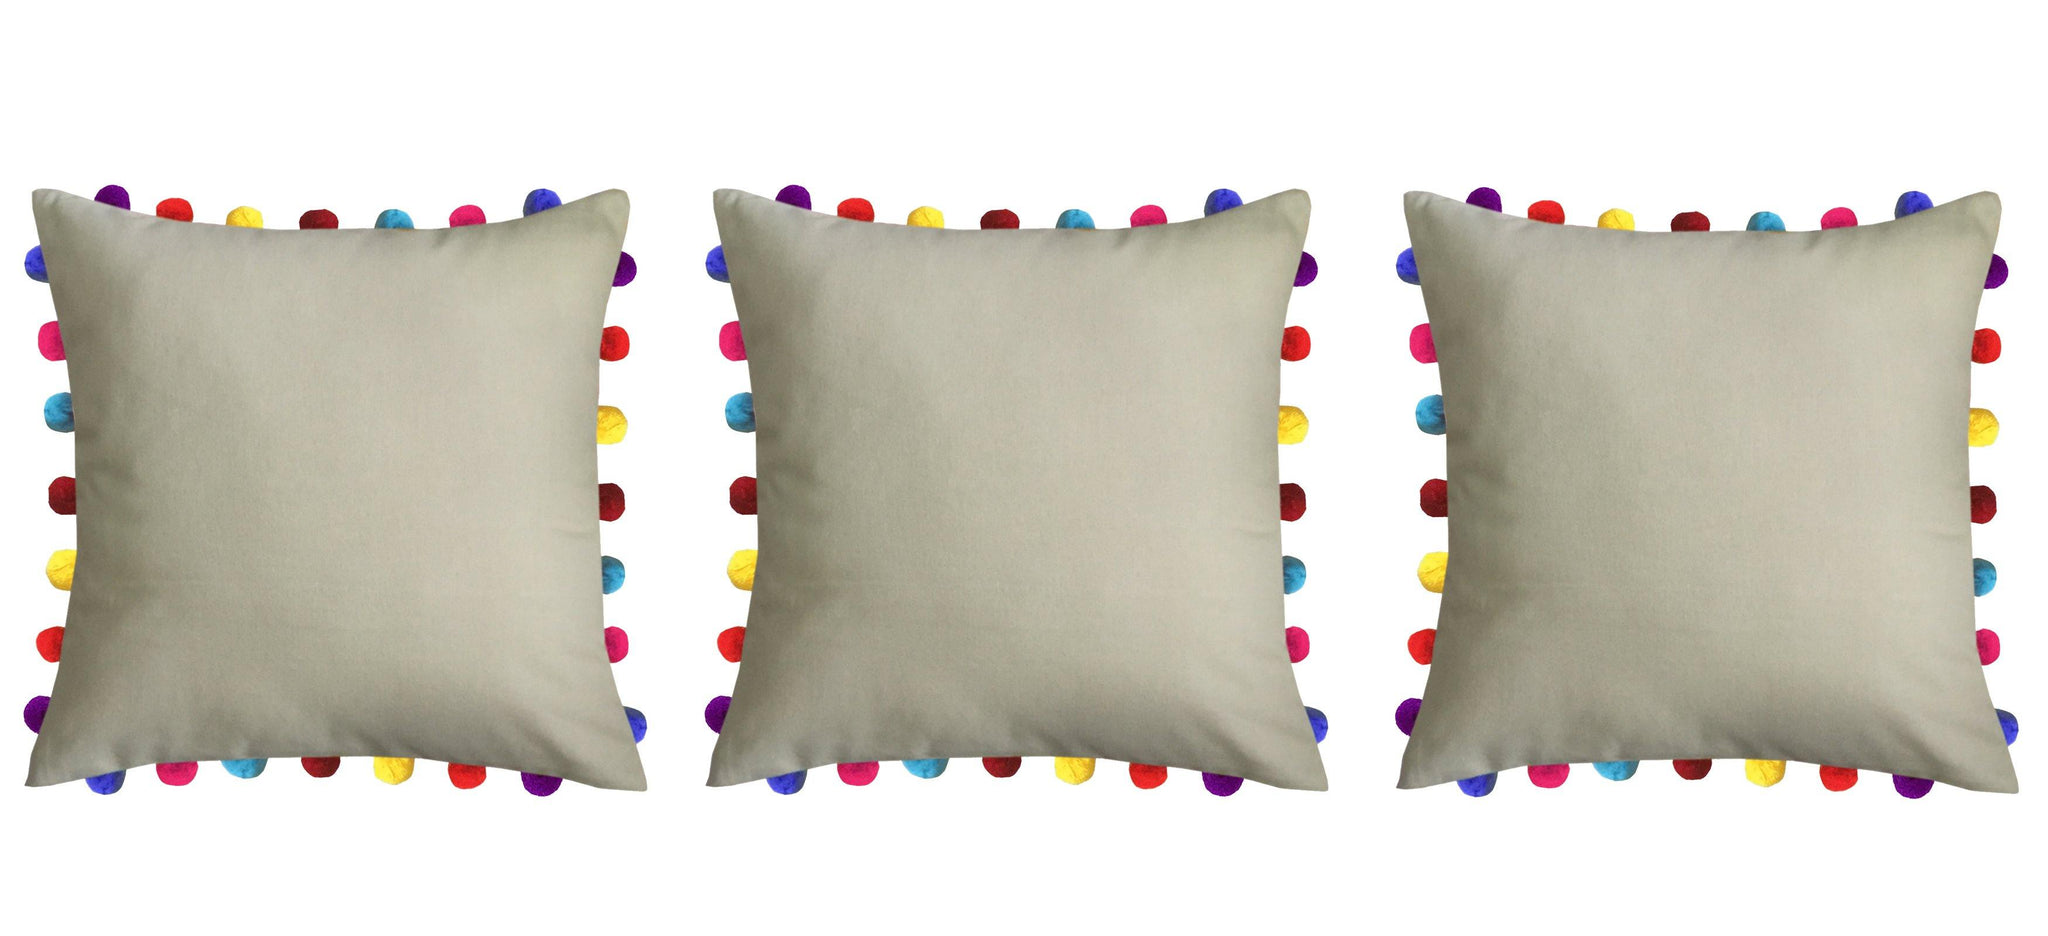 Lushomes Sand Cushion Cover with Colorful Pom Poms (3 pcs, 20 x 20”) - Lushomes